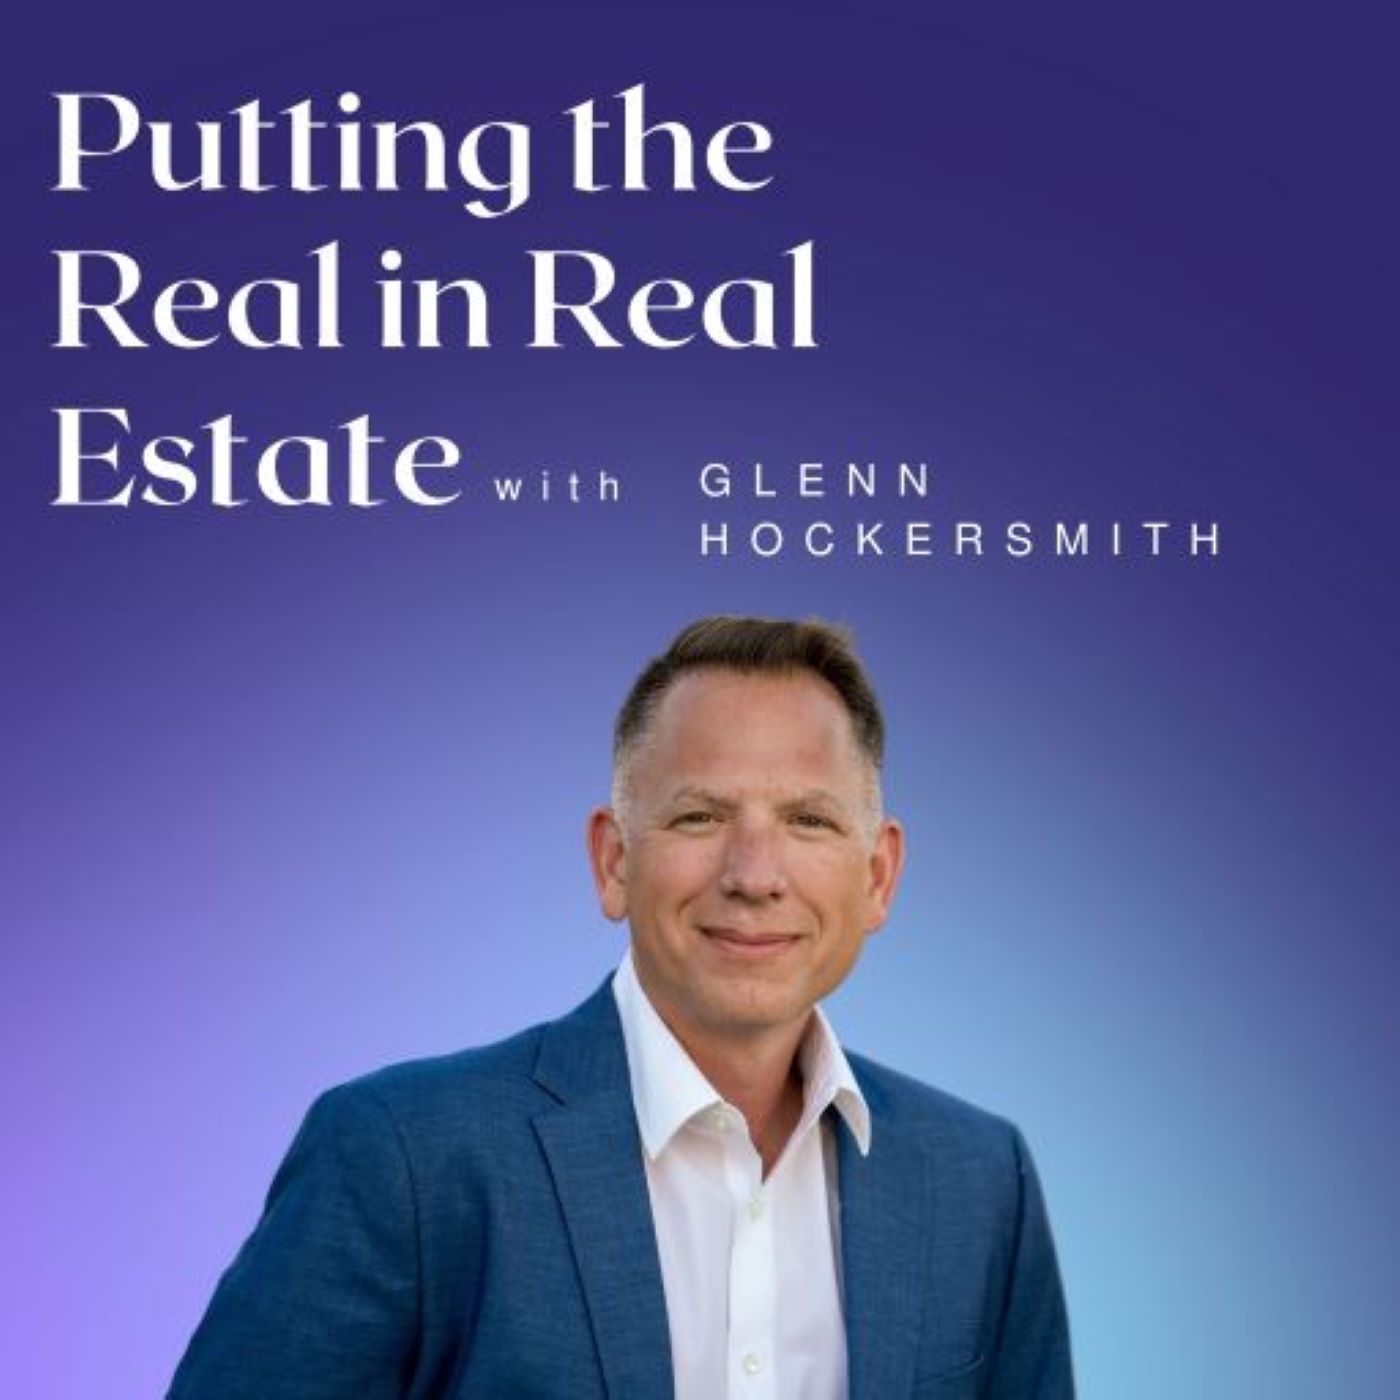 Artwork for Putting the Real in Real Estate with Glenn Hockersmith